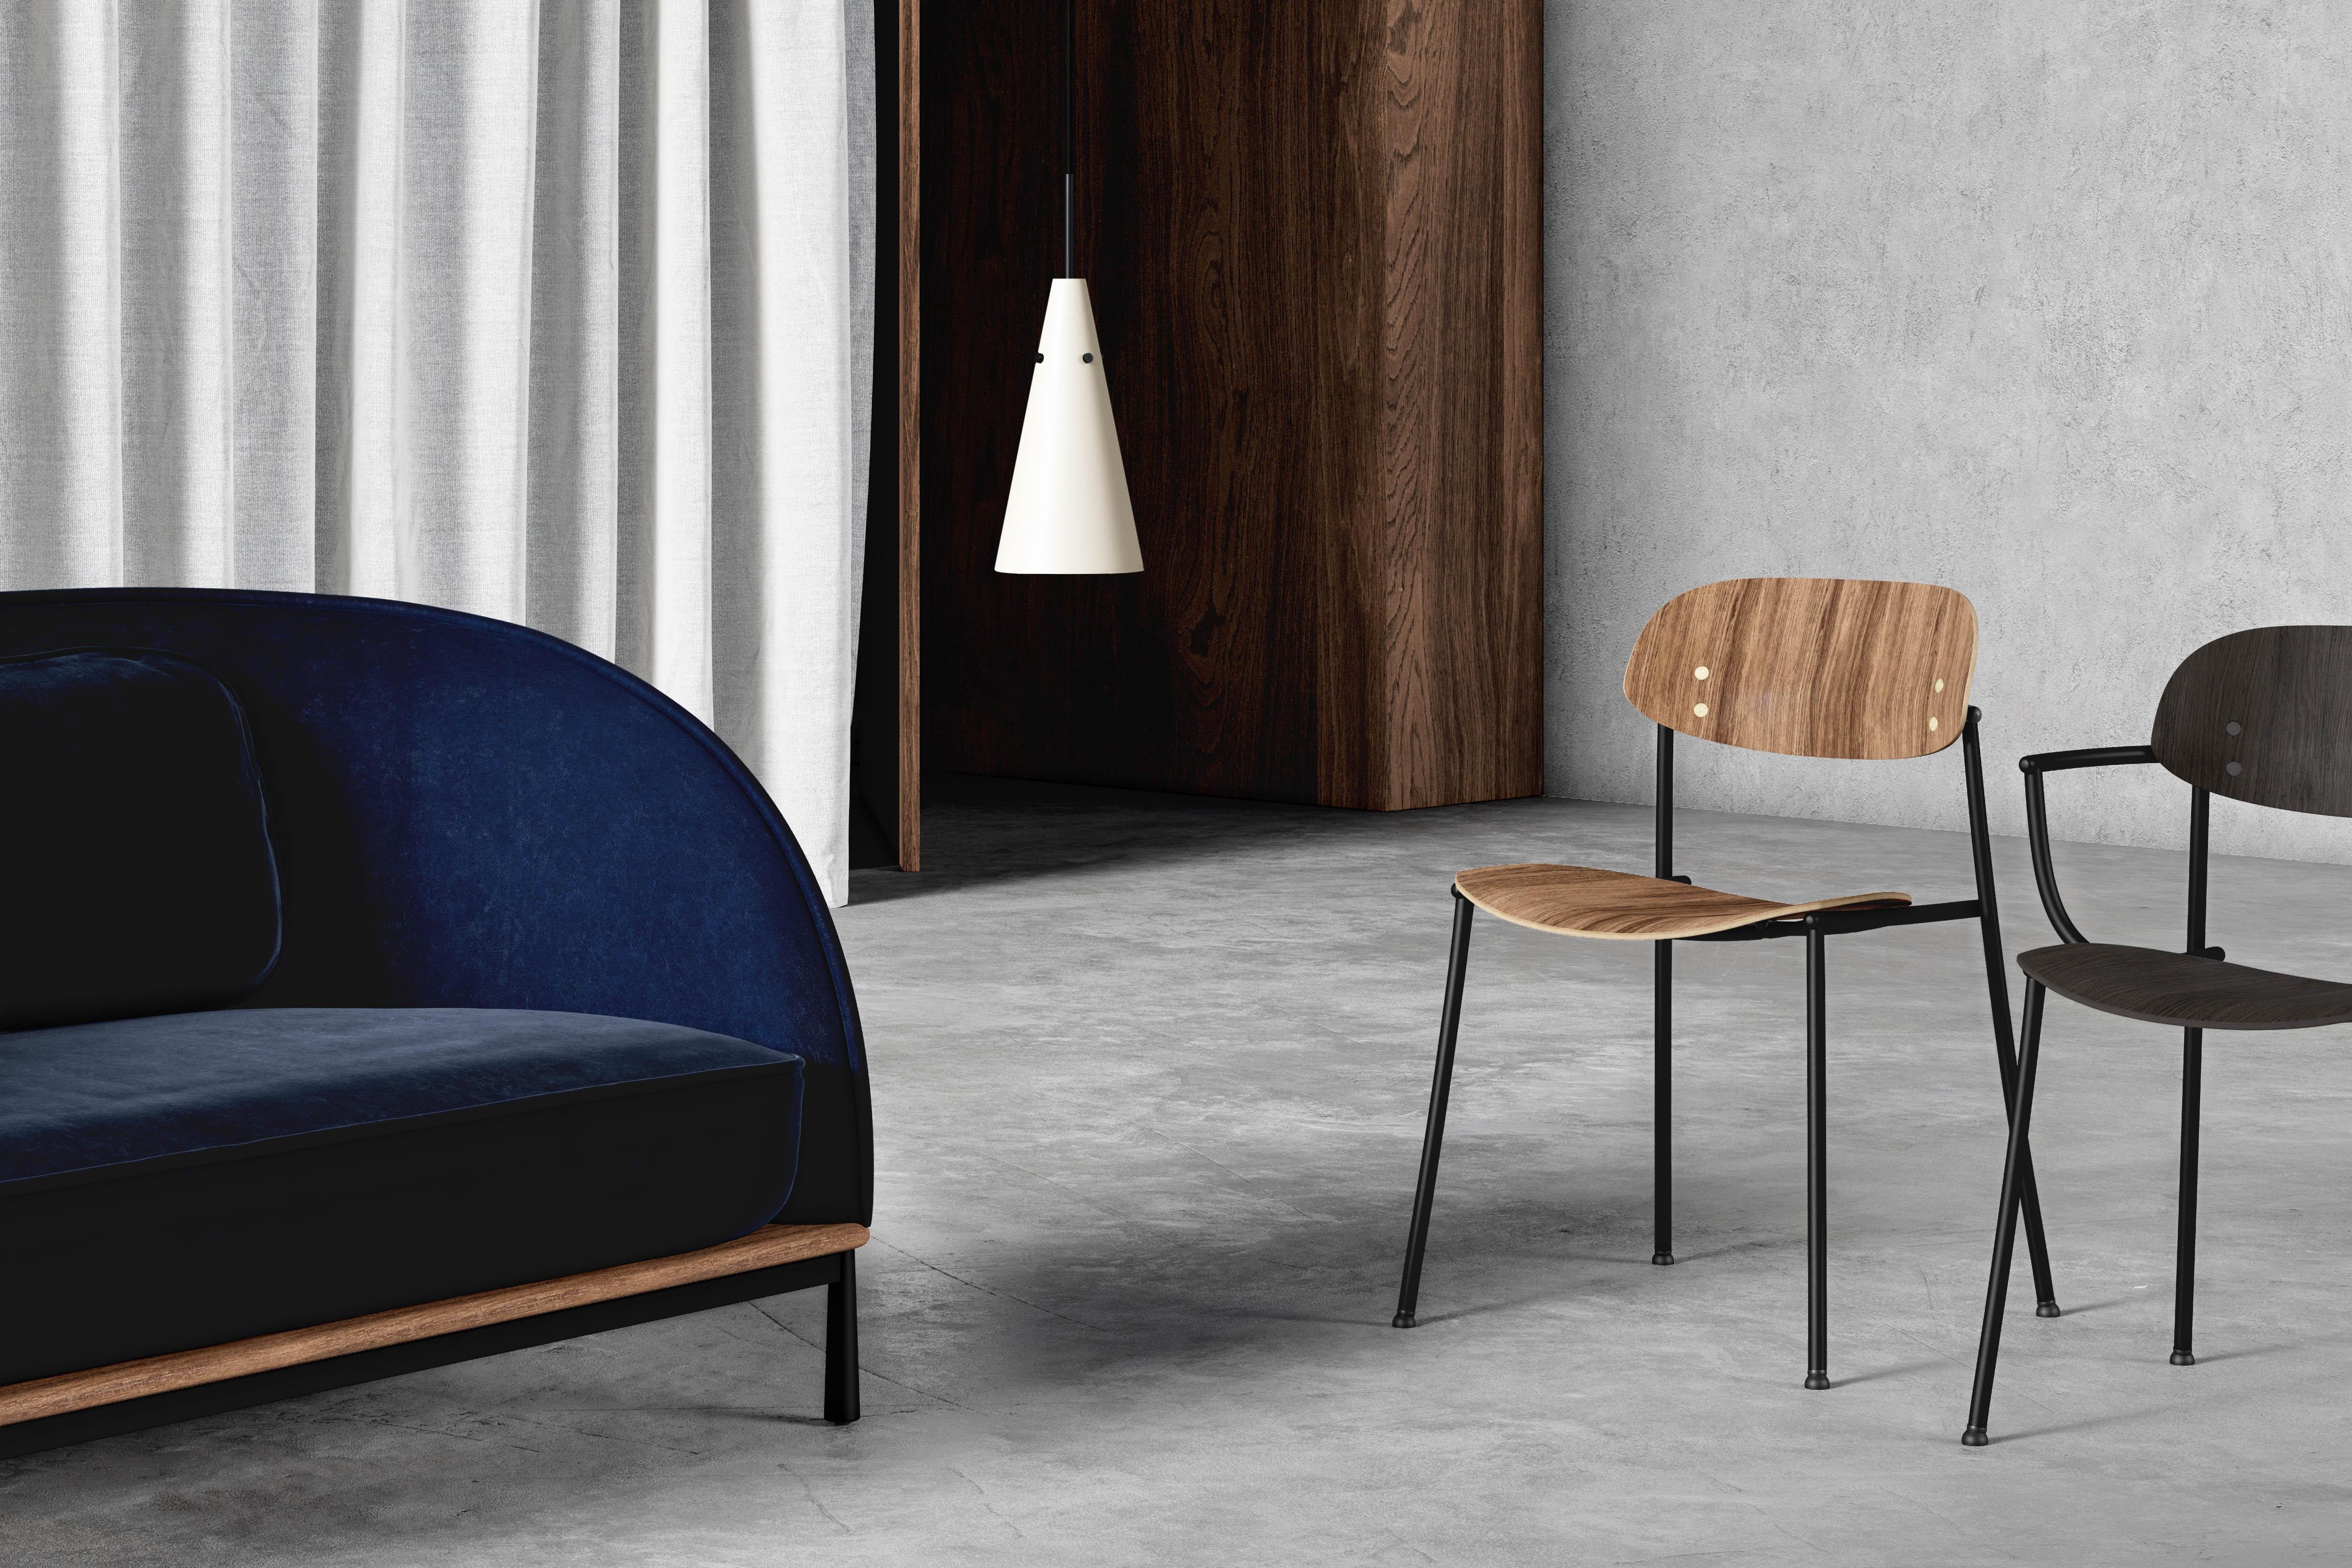 The Ori Dining chair from Stellar Works enhances one’s shared experiences with an intricate composition of body-hugging curves. The dining chair blends its Asian inspiration with a refined Nordic design aesthetic. Crafted from steel, the framework